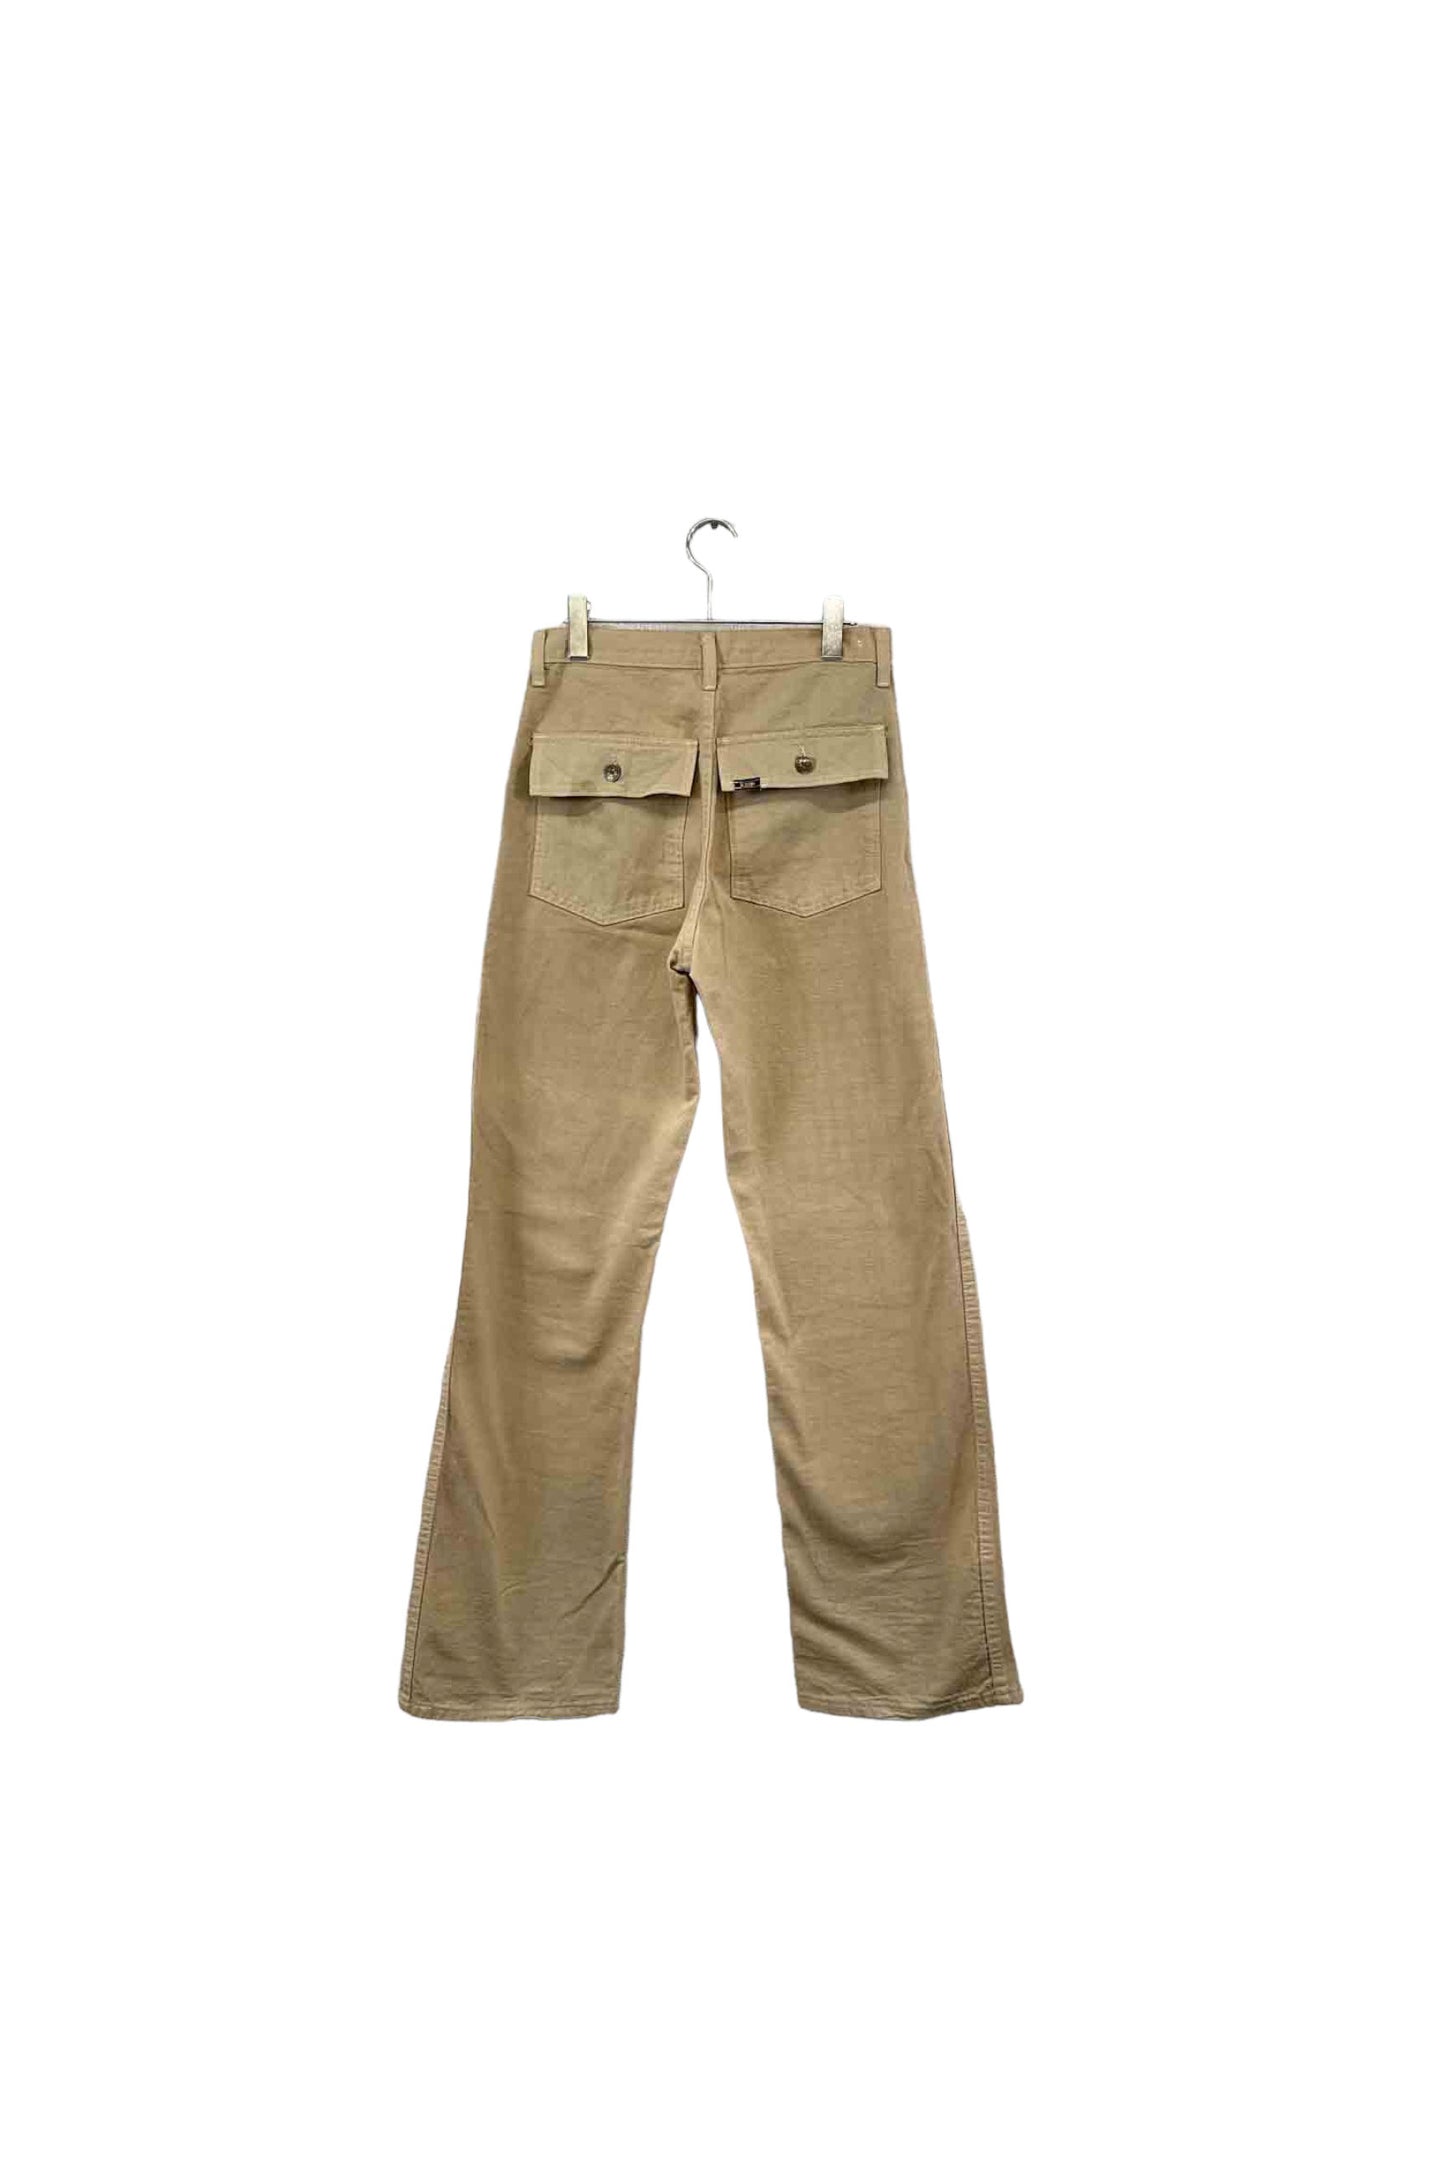 Made in USA Key beige cotton pants